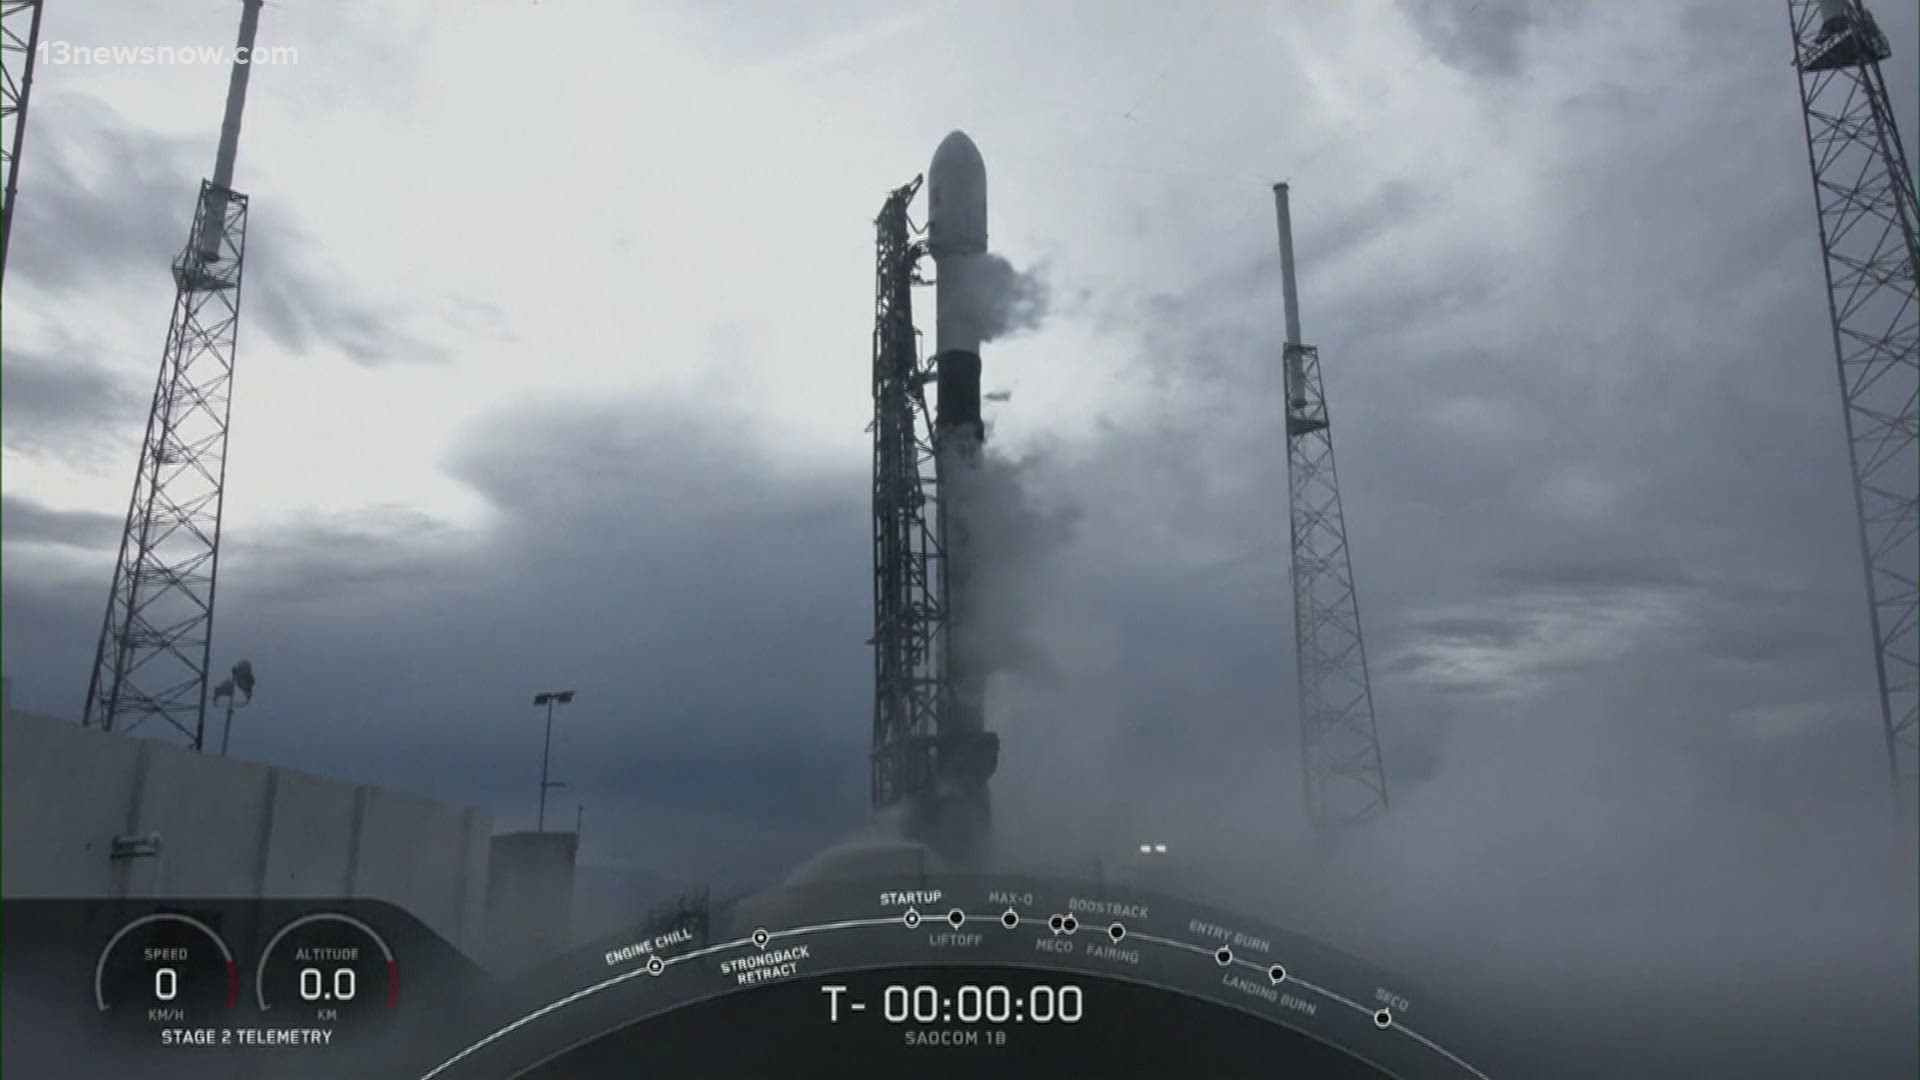 The company is targeting 8:46 a.m. Thursday for the launch from Kennedy Space Center.